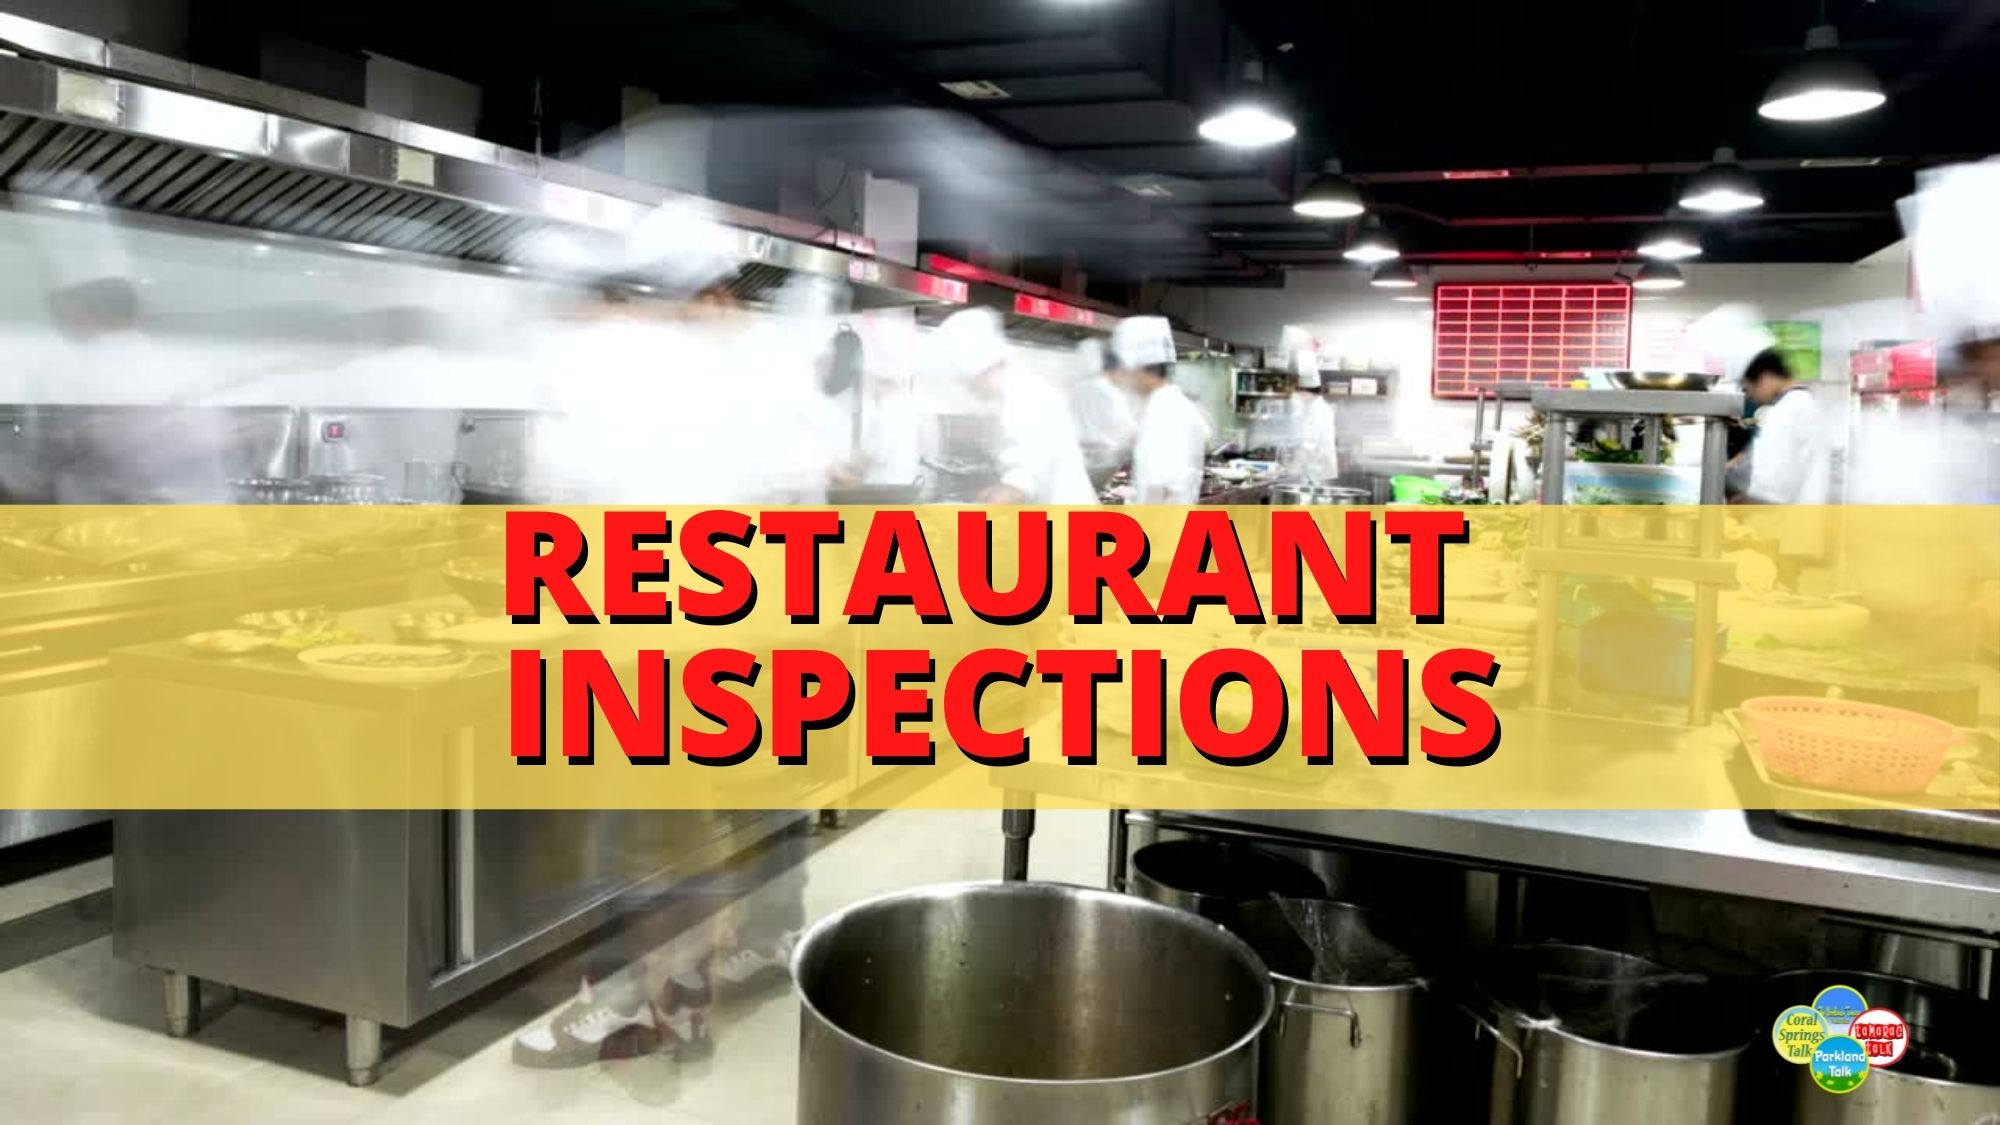 Lauderhill Restaurant Shut Down Following Discovery of Rodent Activity